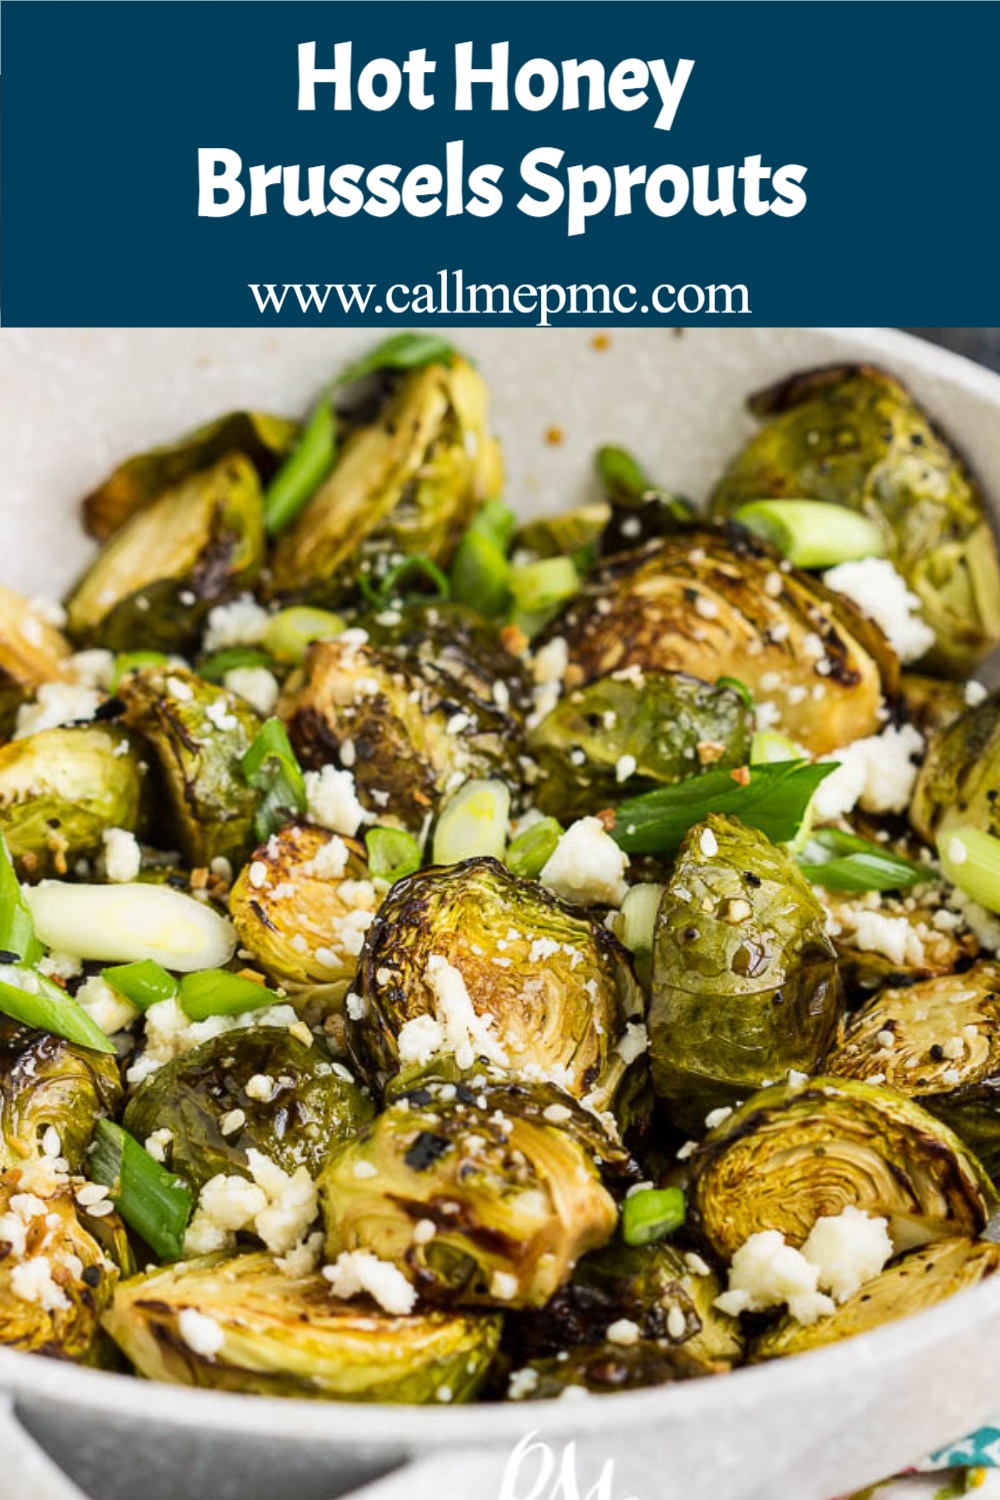 Hot Honey Brussels Sprouts Recipe is perfectly crispy on the outside, tender and soft on the inside, and coated in a lusciously sweet and spicy glaze. #honey #Brusselssprouts #vegetables #roasted #spicy #hot #recipe #callmepmc